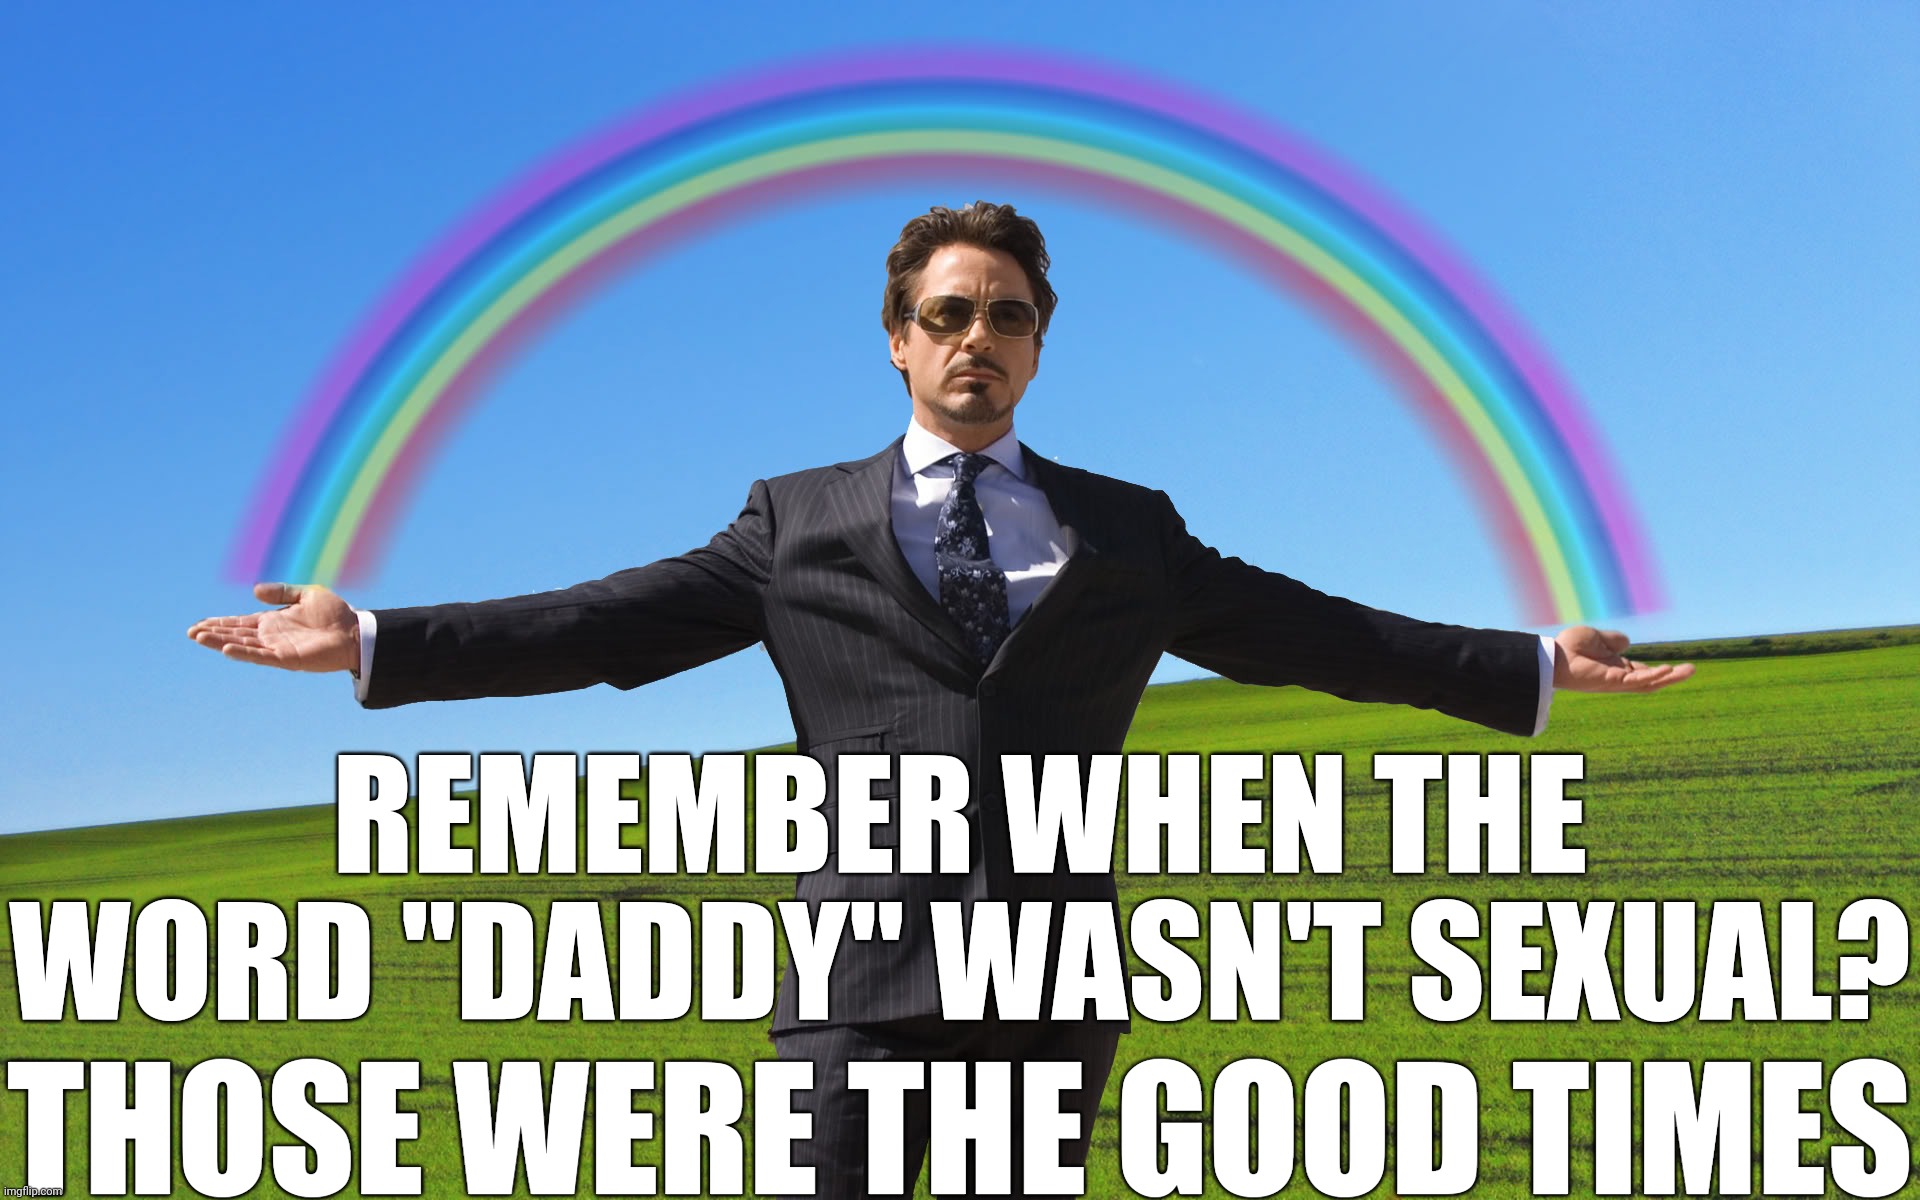 Gen Z ruined everything | REMEMBER WHEN THE WORD "DADDY" WASN'T SEXUAL? THOSE WERE THE GOOD TIMES | image tagged in tony stark rainbow | made w/ Imgflip meme maker